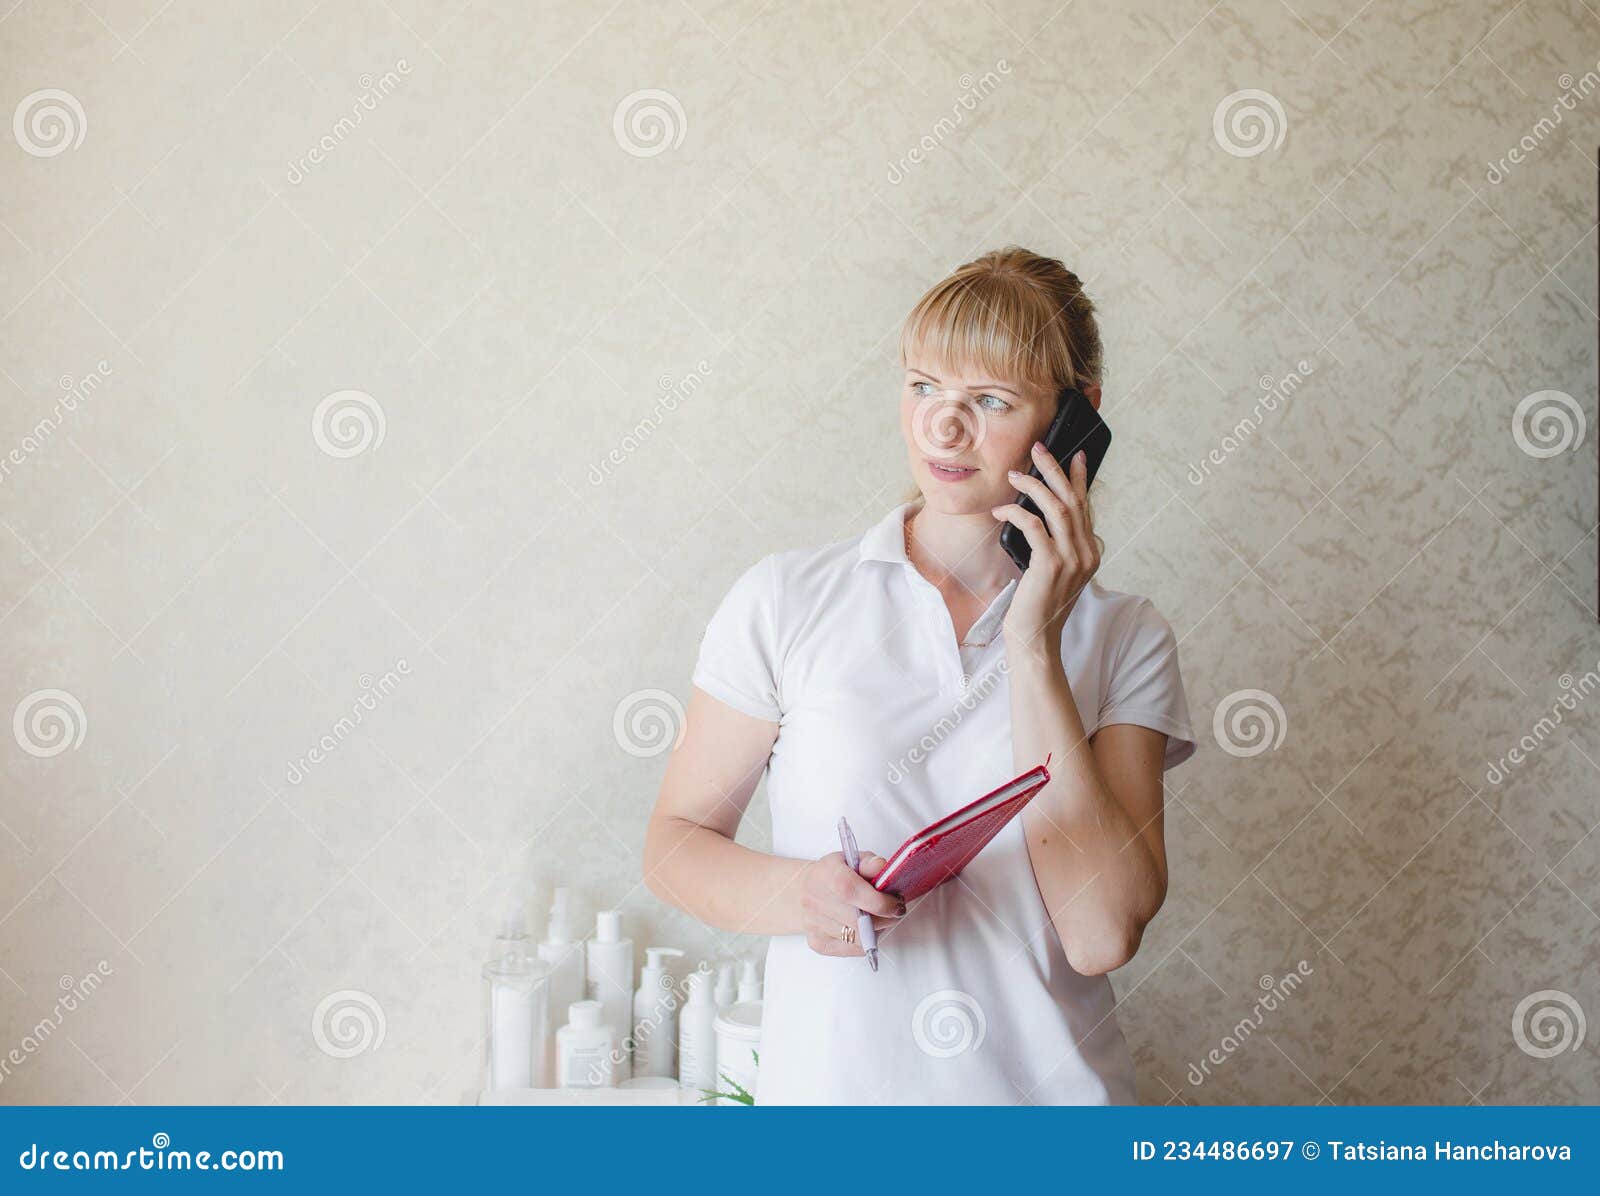 a cosmetologist girl consults a client by phone. pre-registration